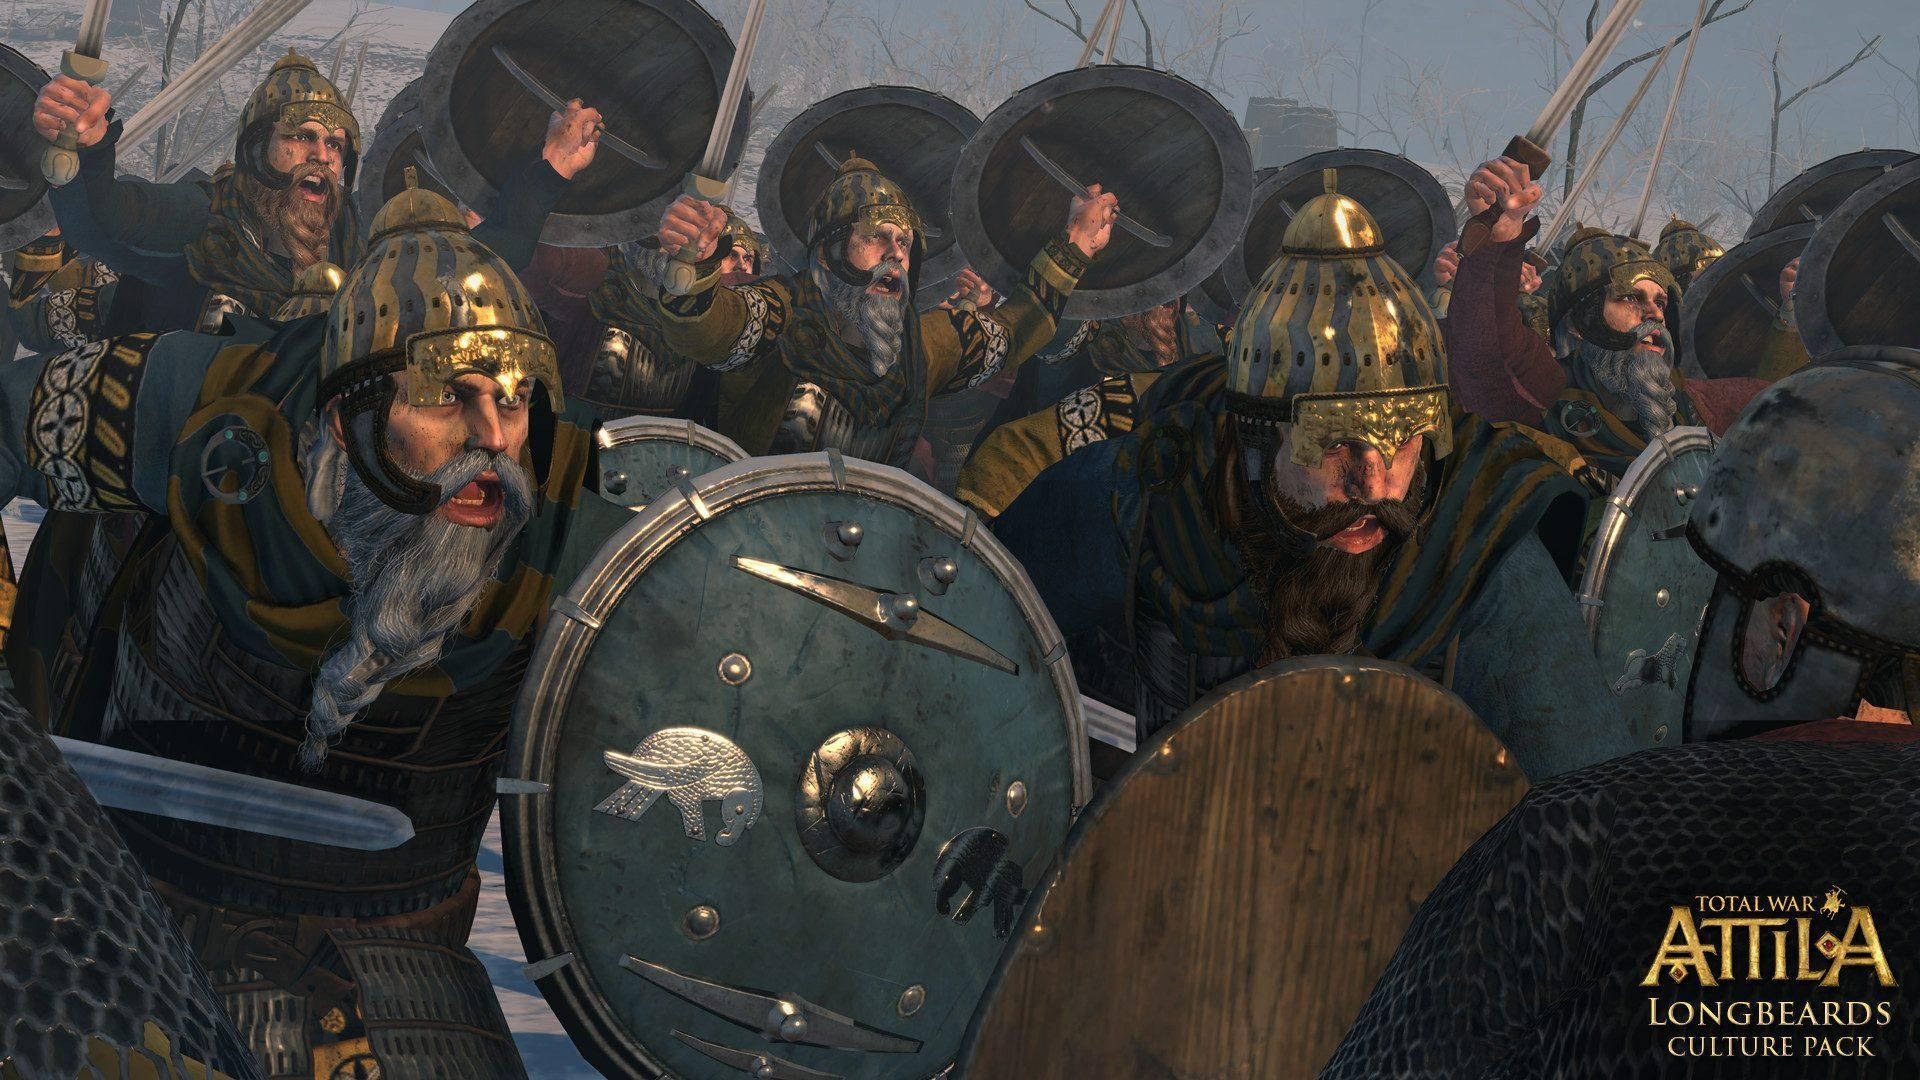 1920x1080 Download Total War Attila Soldiers With Shields Wallpaper